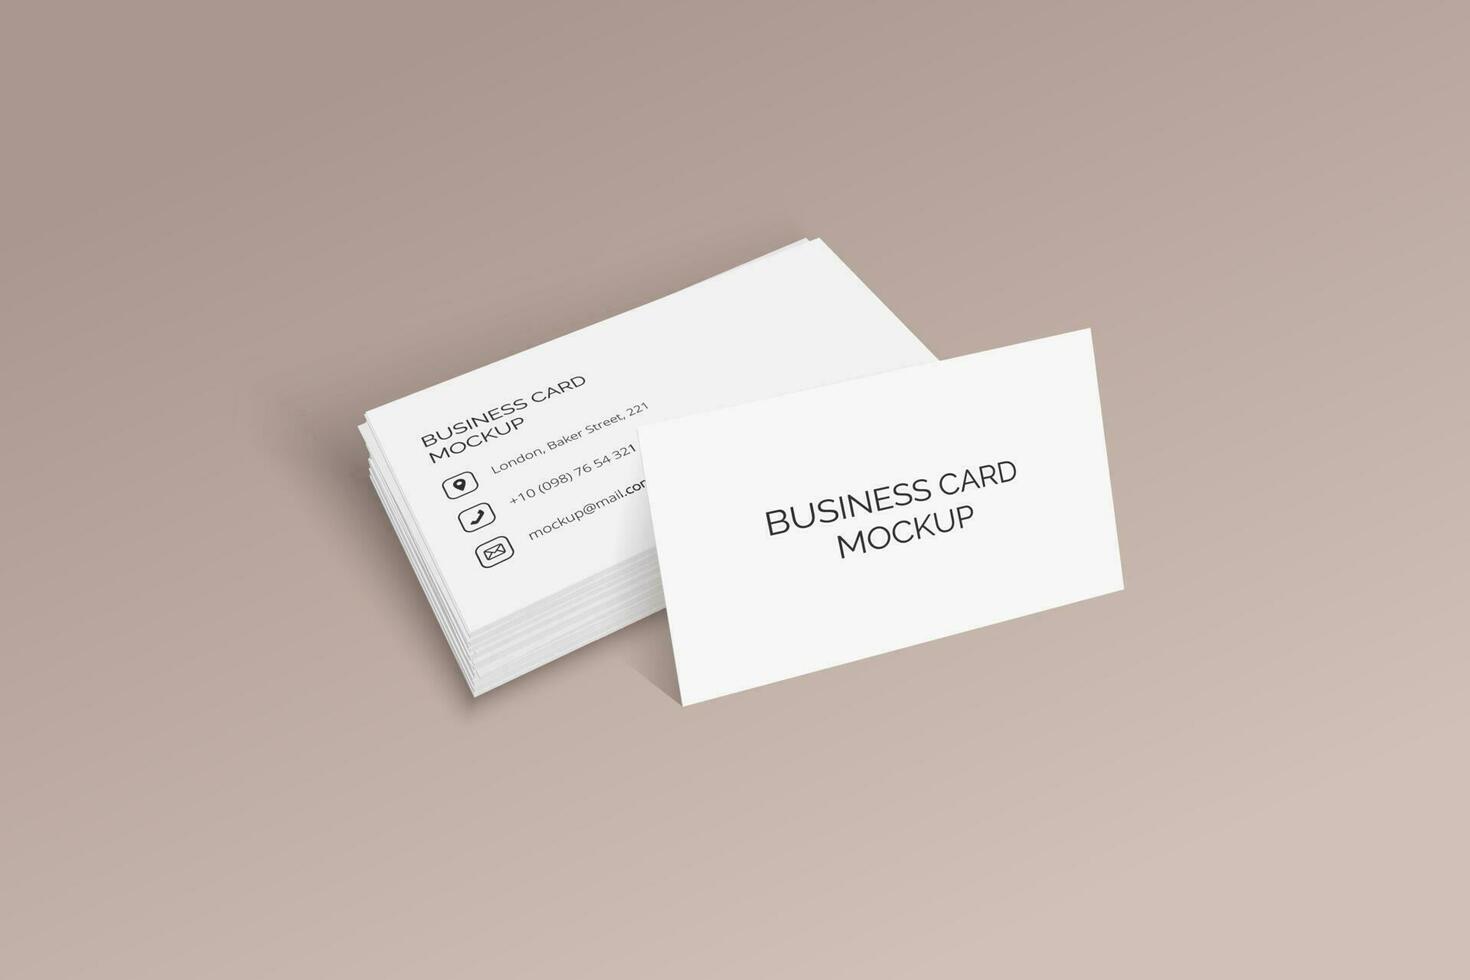 Realistic vector mockup of blank corporate stationery - business cards, note cards and address sheets. Add your company name and contact information. Perfect for office. Beige colors